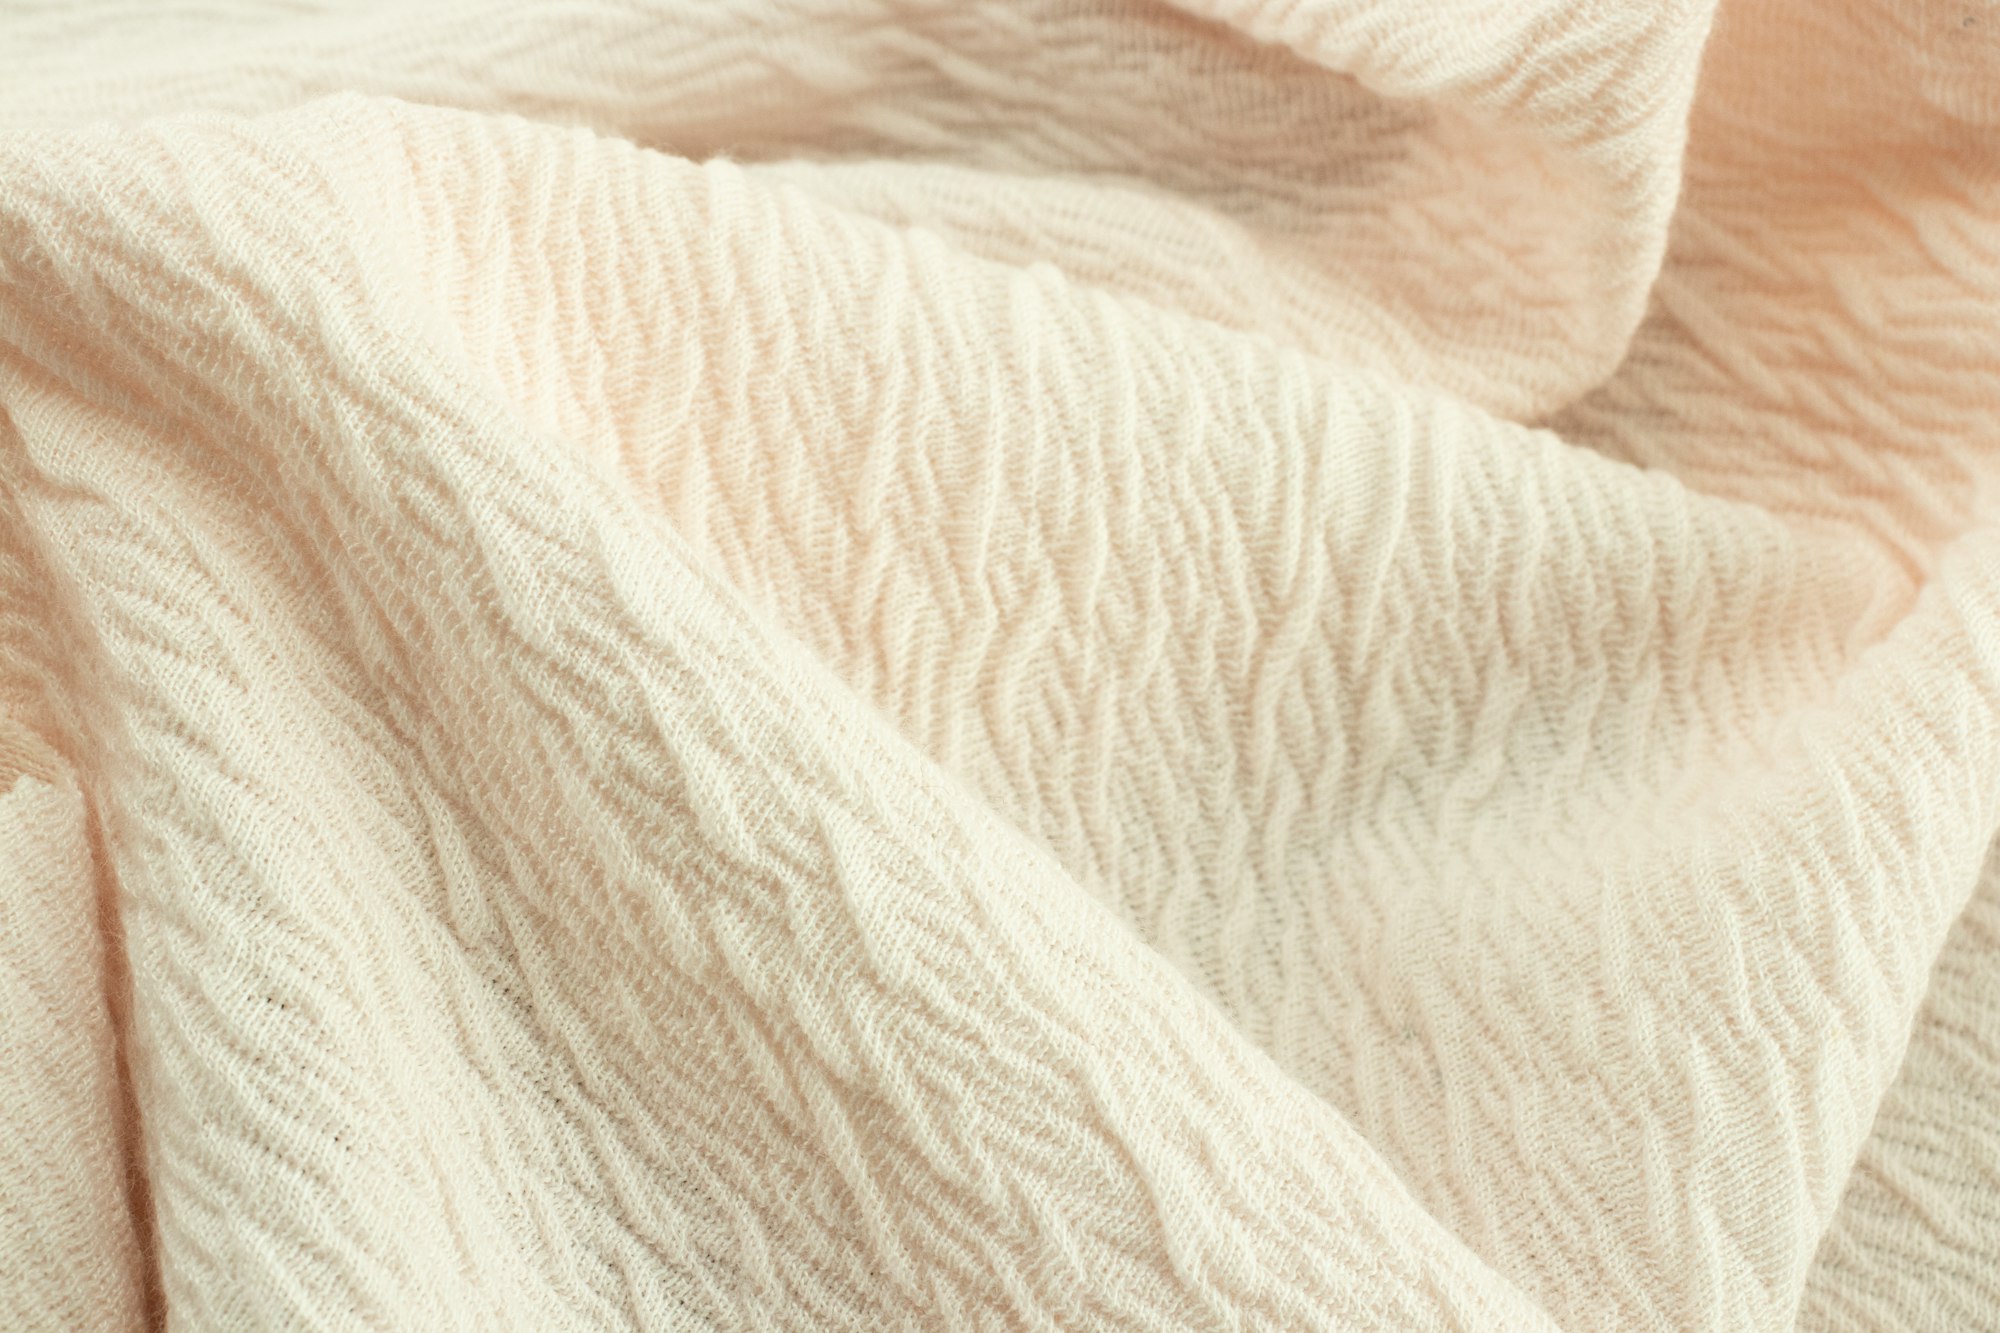 Ull - Interlock Jacquard mesh with texture, wrinkled and soft. Its colour is a very soft pink. Perfect for dresses and shirts.